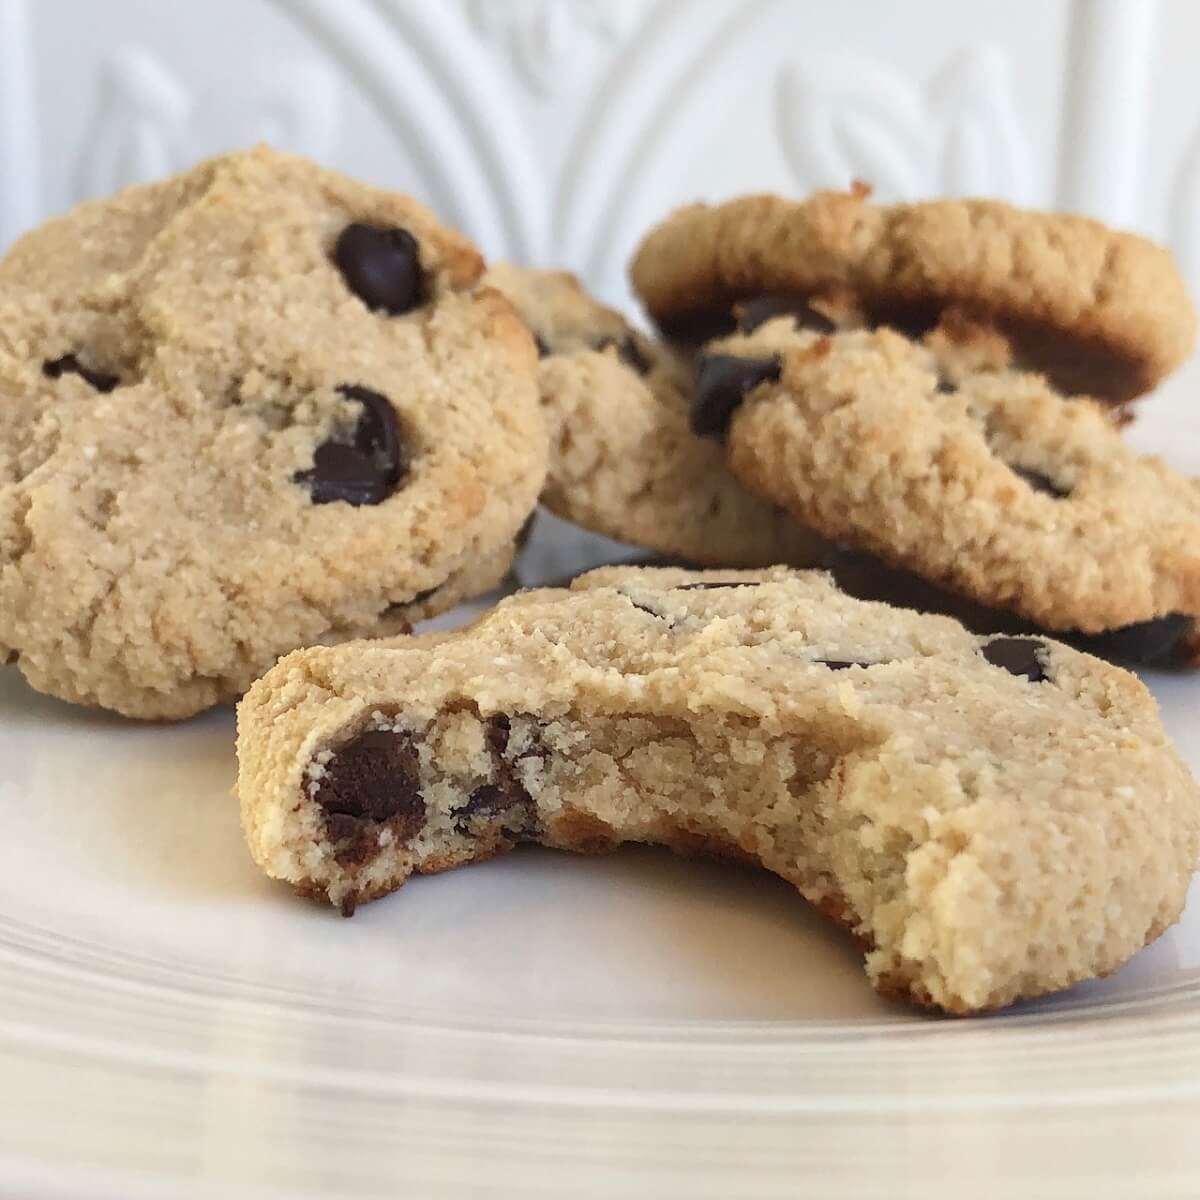 A pile of vegan tahini chocolate chip cookies with a bite missing from one.